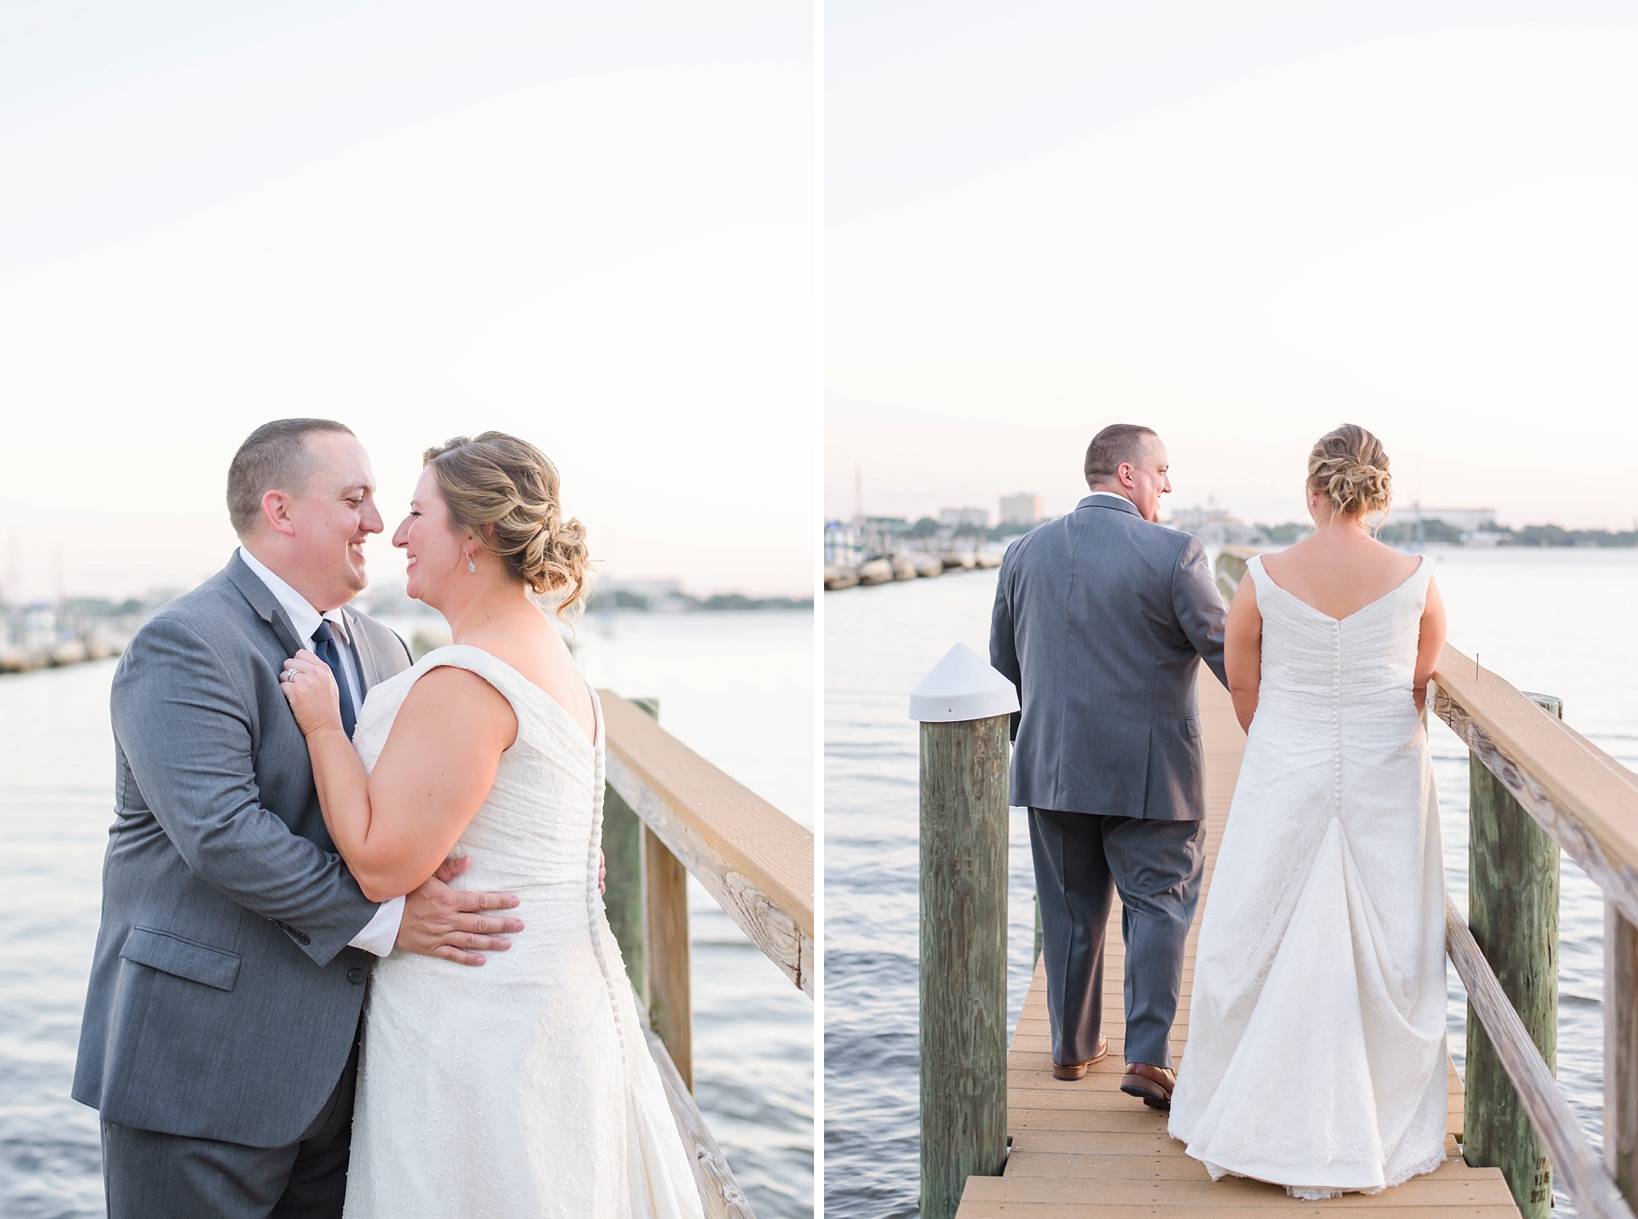 The bride and groom go out of the dock for some golden hour portraits